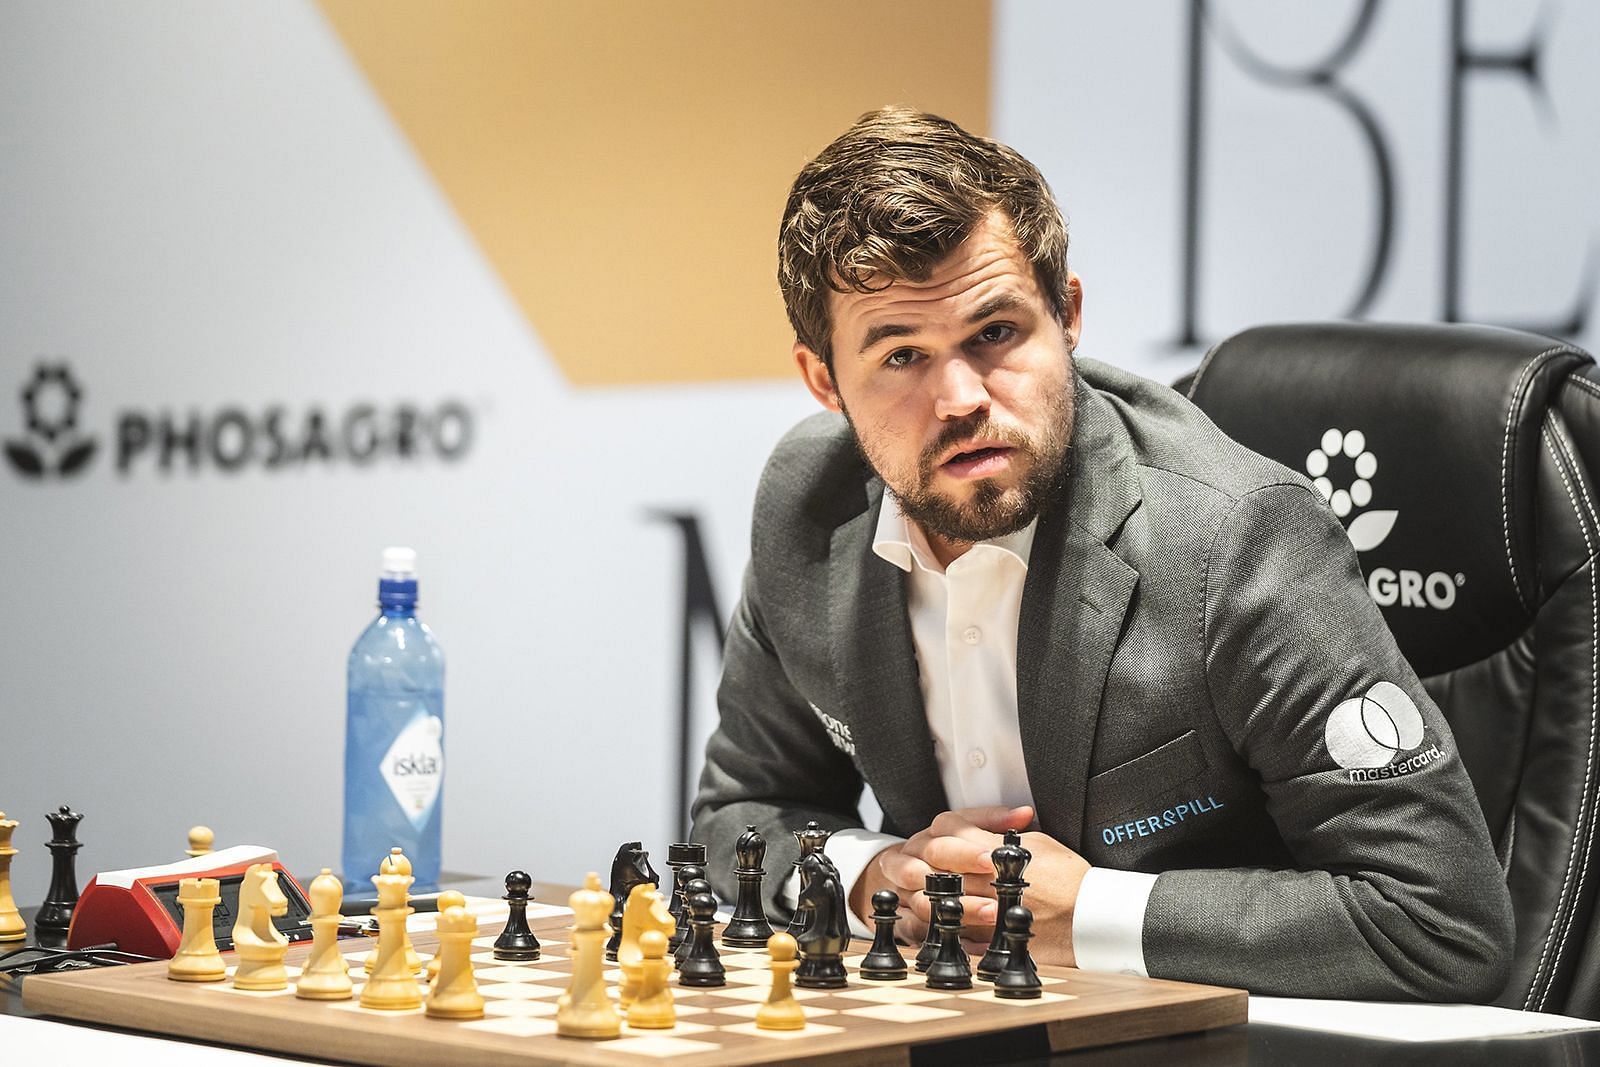 Reigning World Chess Champion Magnus Carlsen of Norway will participate in the 44th Chess Olympiad in Chennai. (Pic credit: Chess.com)